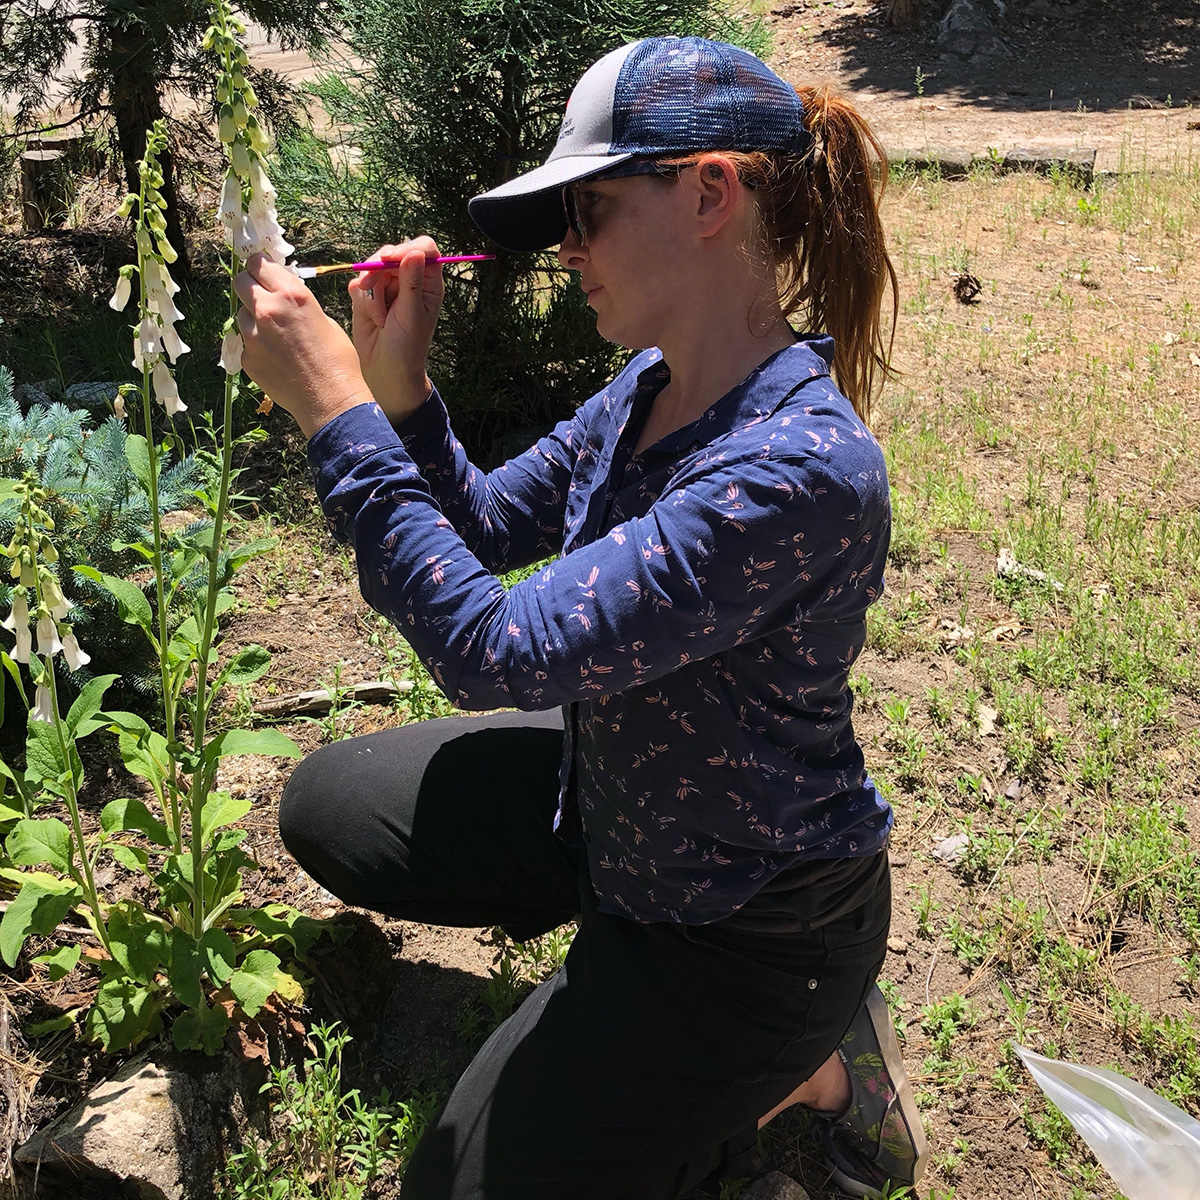 Hollis Woodard is using a paintbrush to artificially pollinate foxgloves as part of a scientific experiment. She is wearing sunglasses, a navy blue baseball cap, a navy blue shirt, black pants, and sneakers.